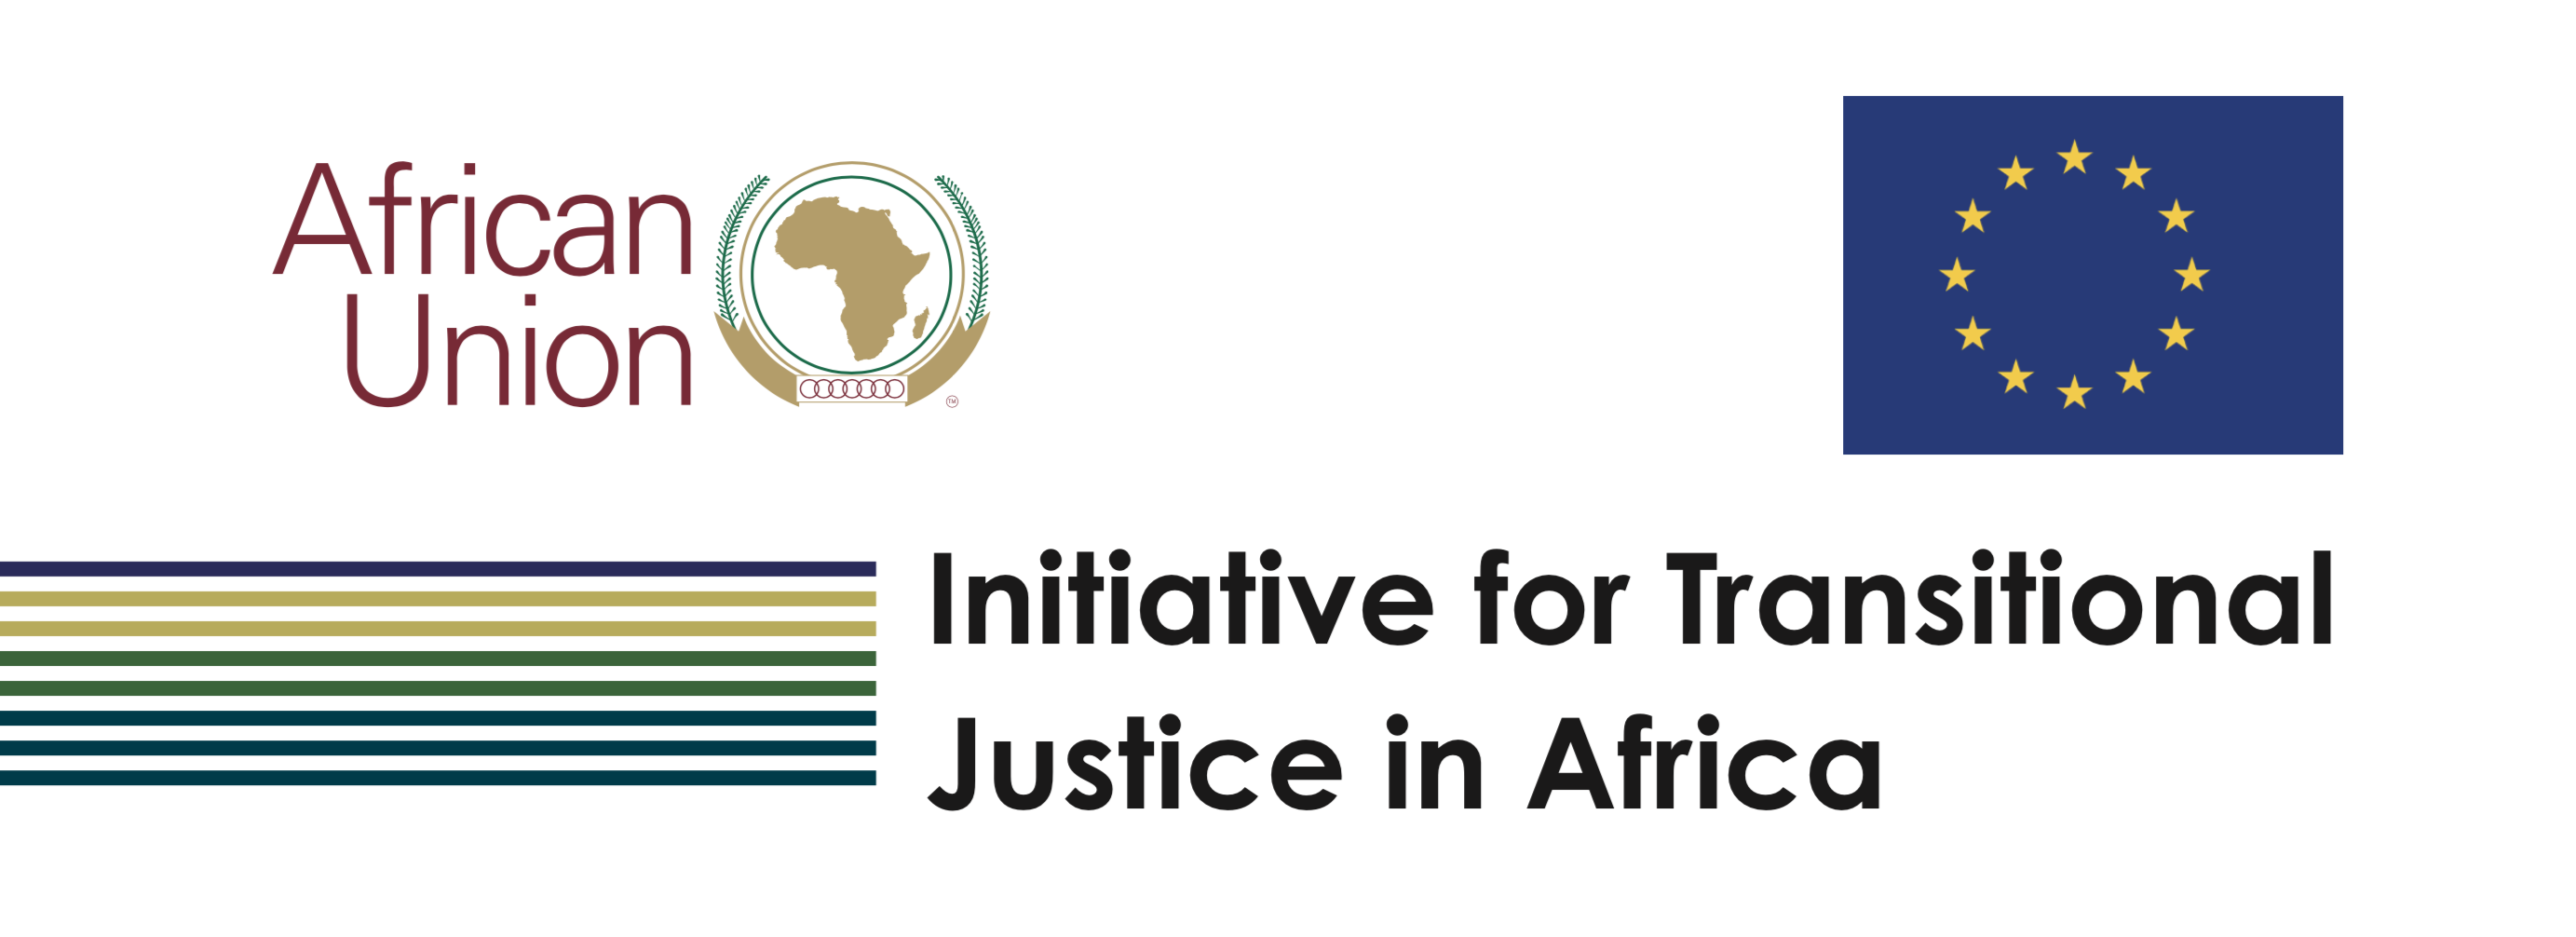 The logos for the African Union and the European Union on top of a series of decorative lines and the title "Initiative for Transitional Justice in Africa"